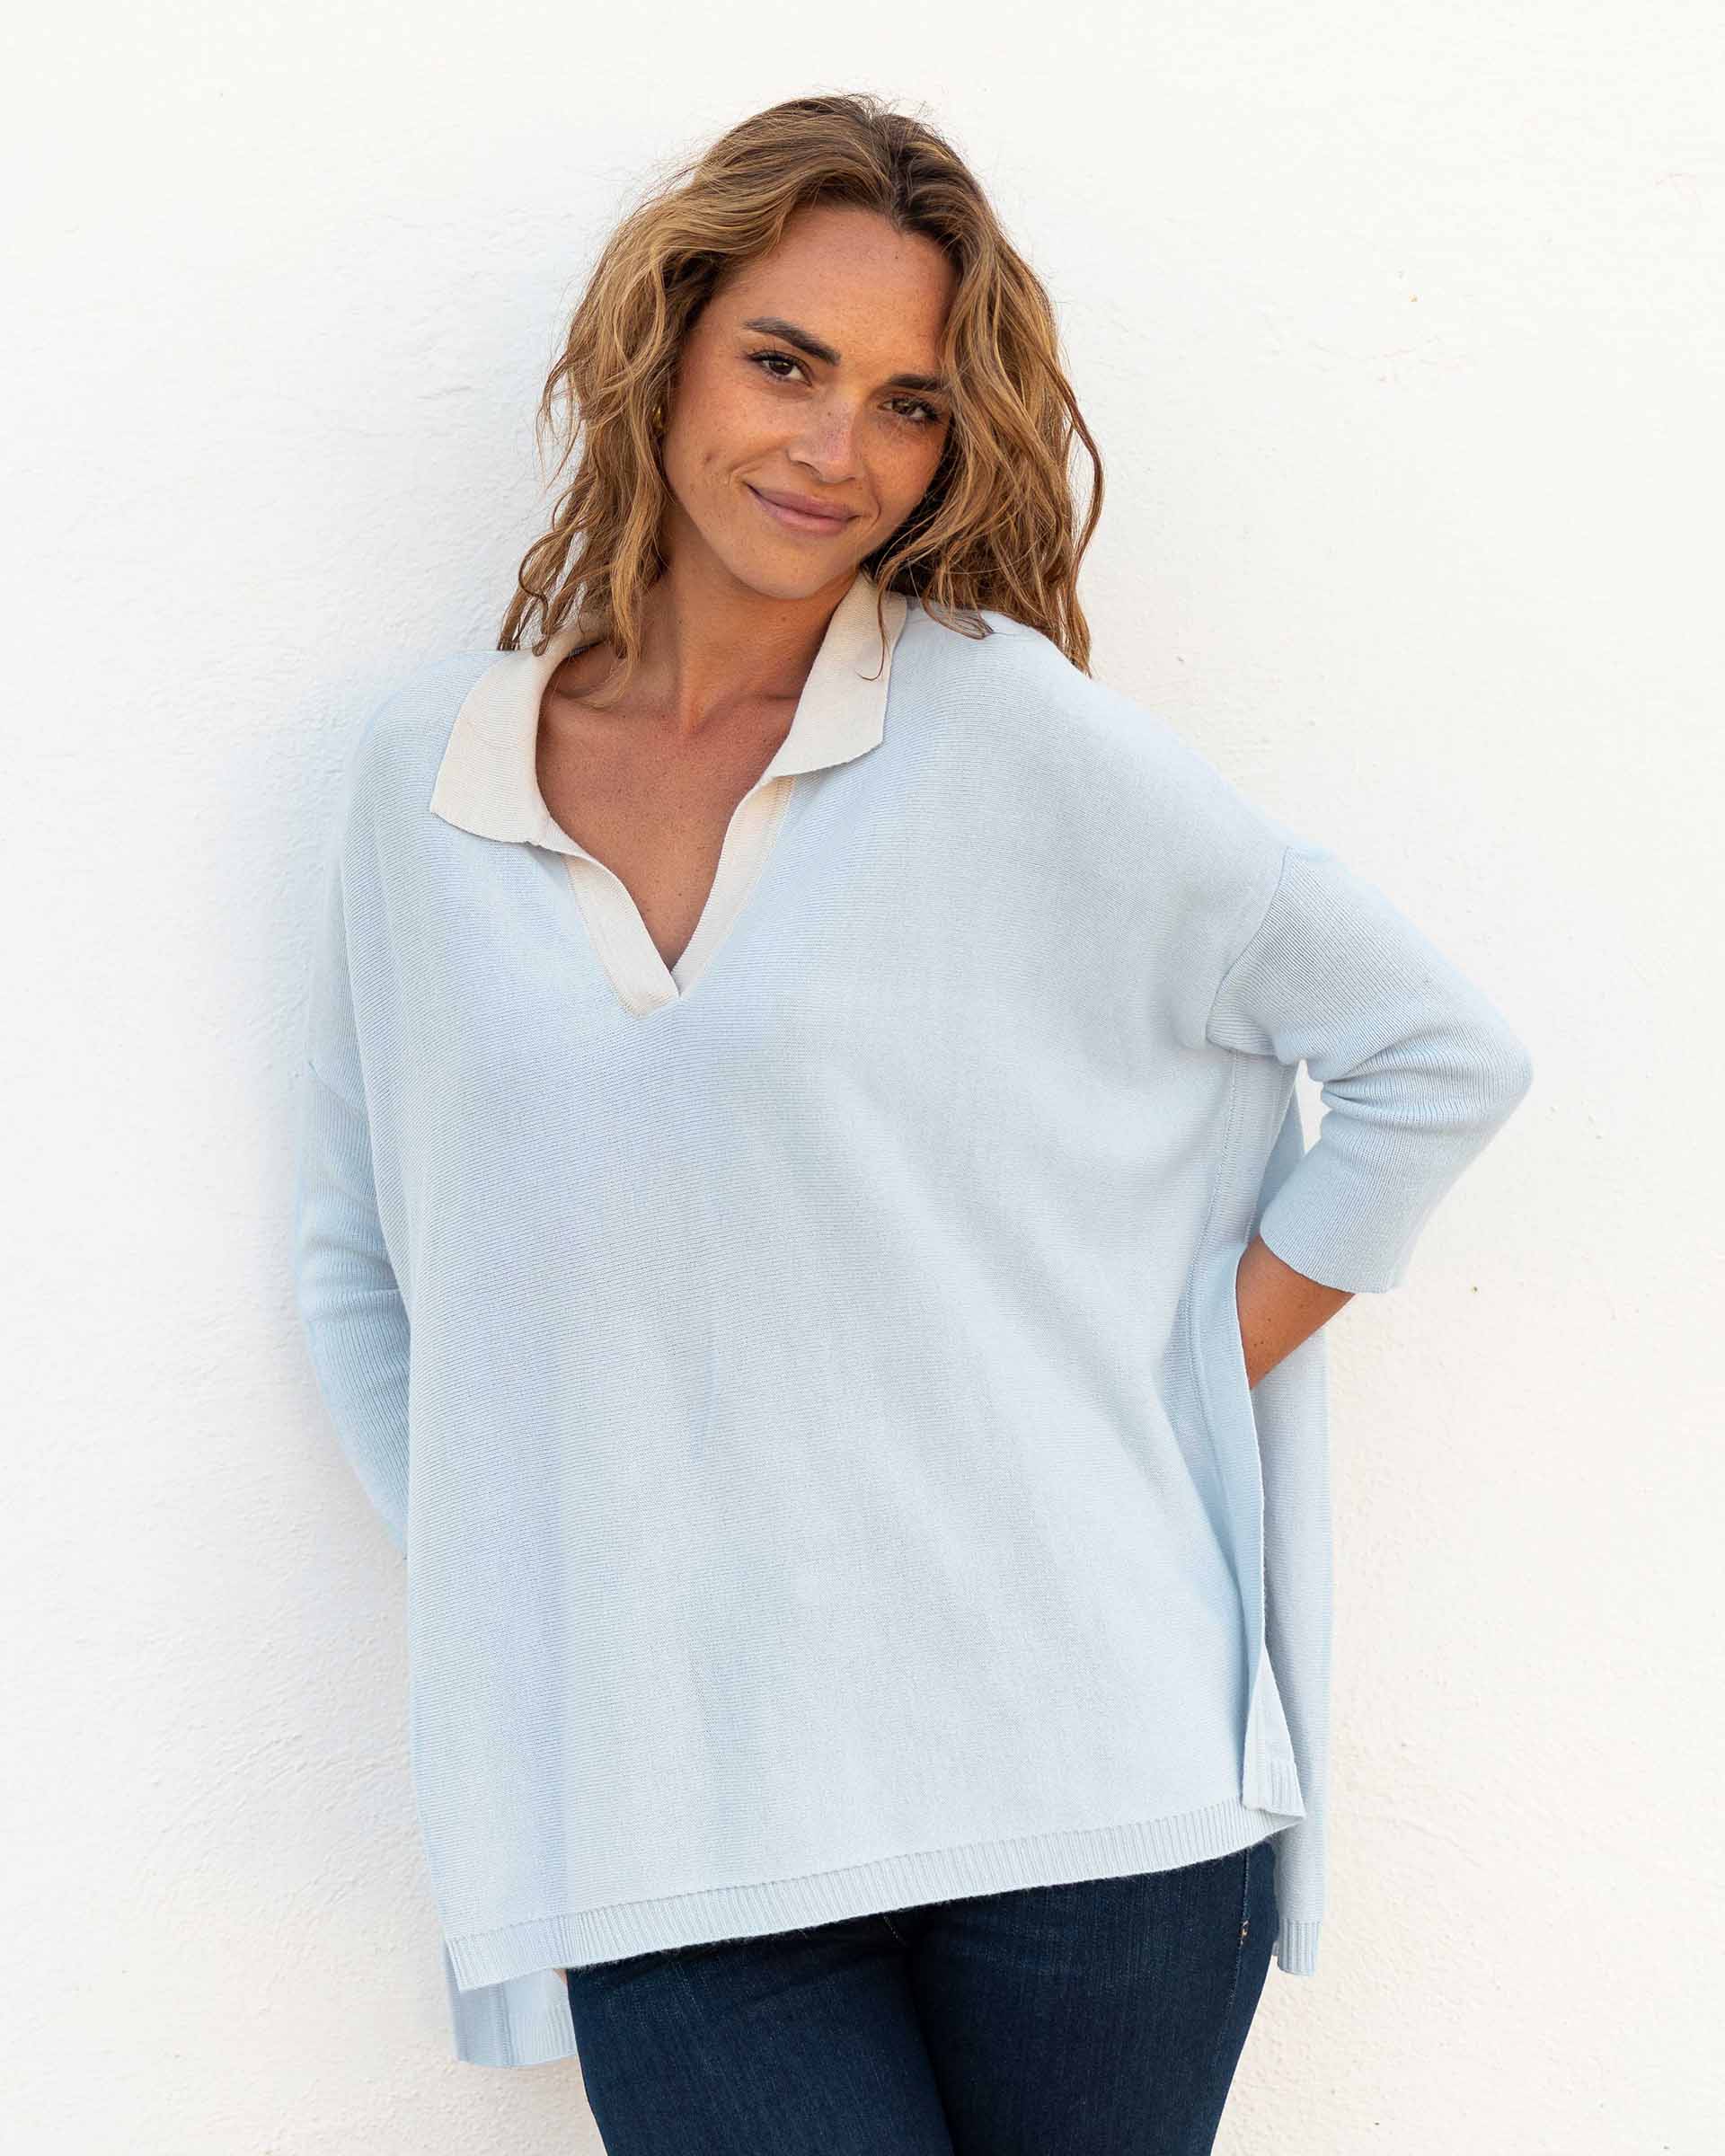 Women's Light Blue Heathered White Collared V-neck Polo Sweater Front View of Hands Behind Back